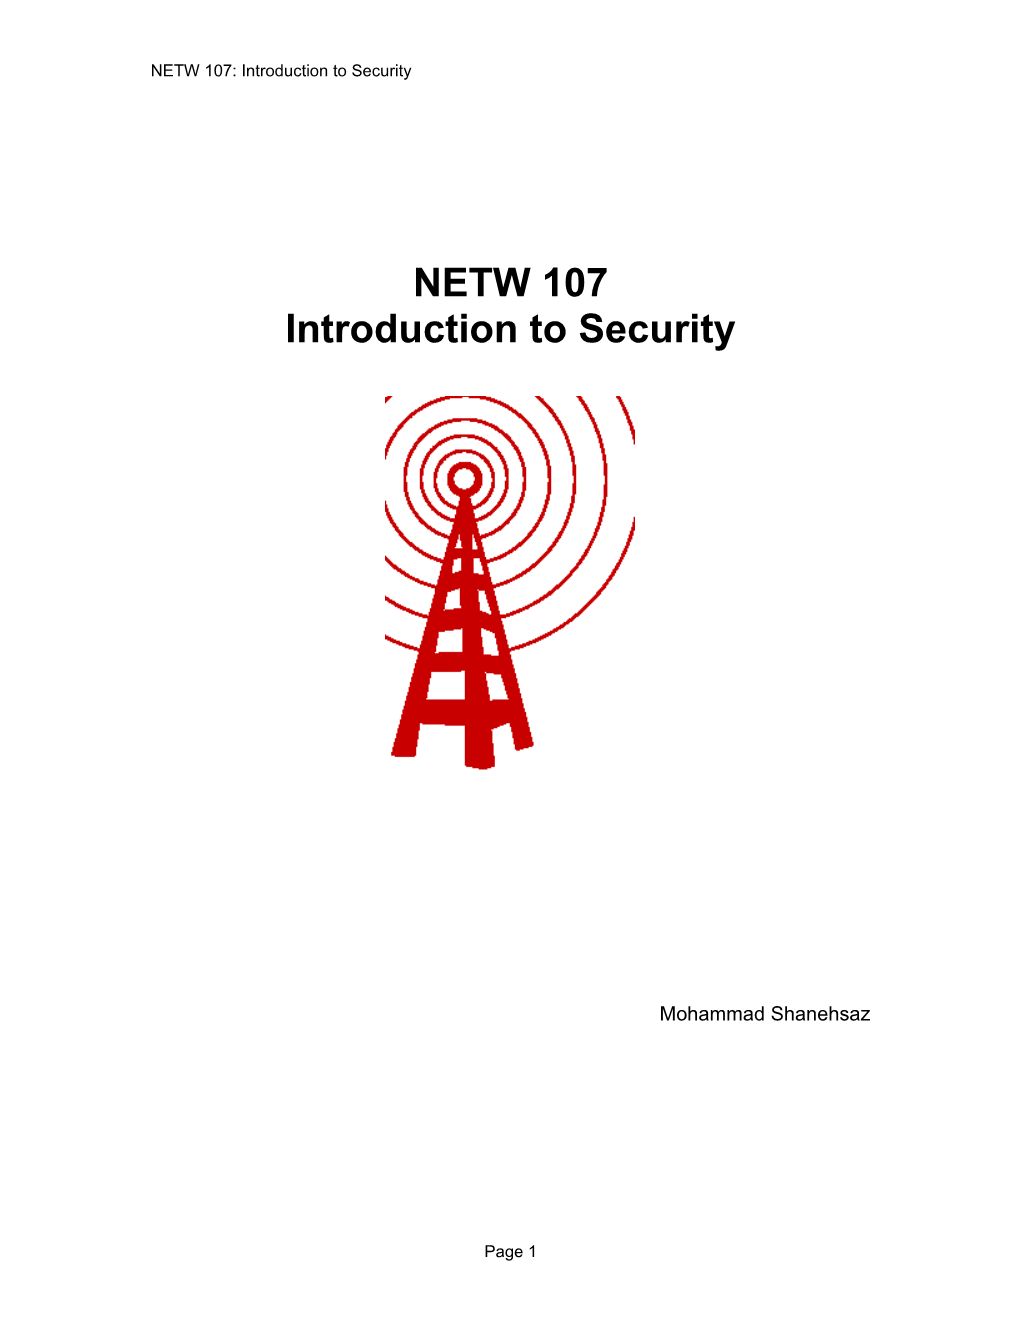 Information Technology: Guide to Network Security Fundamentals